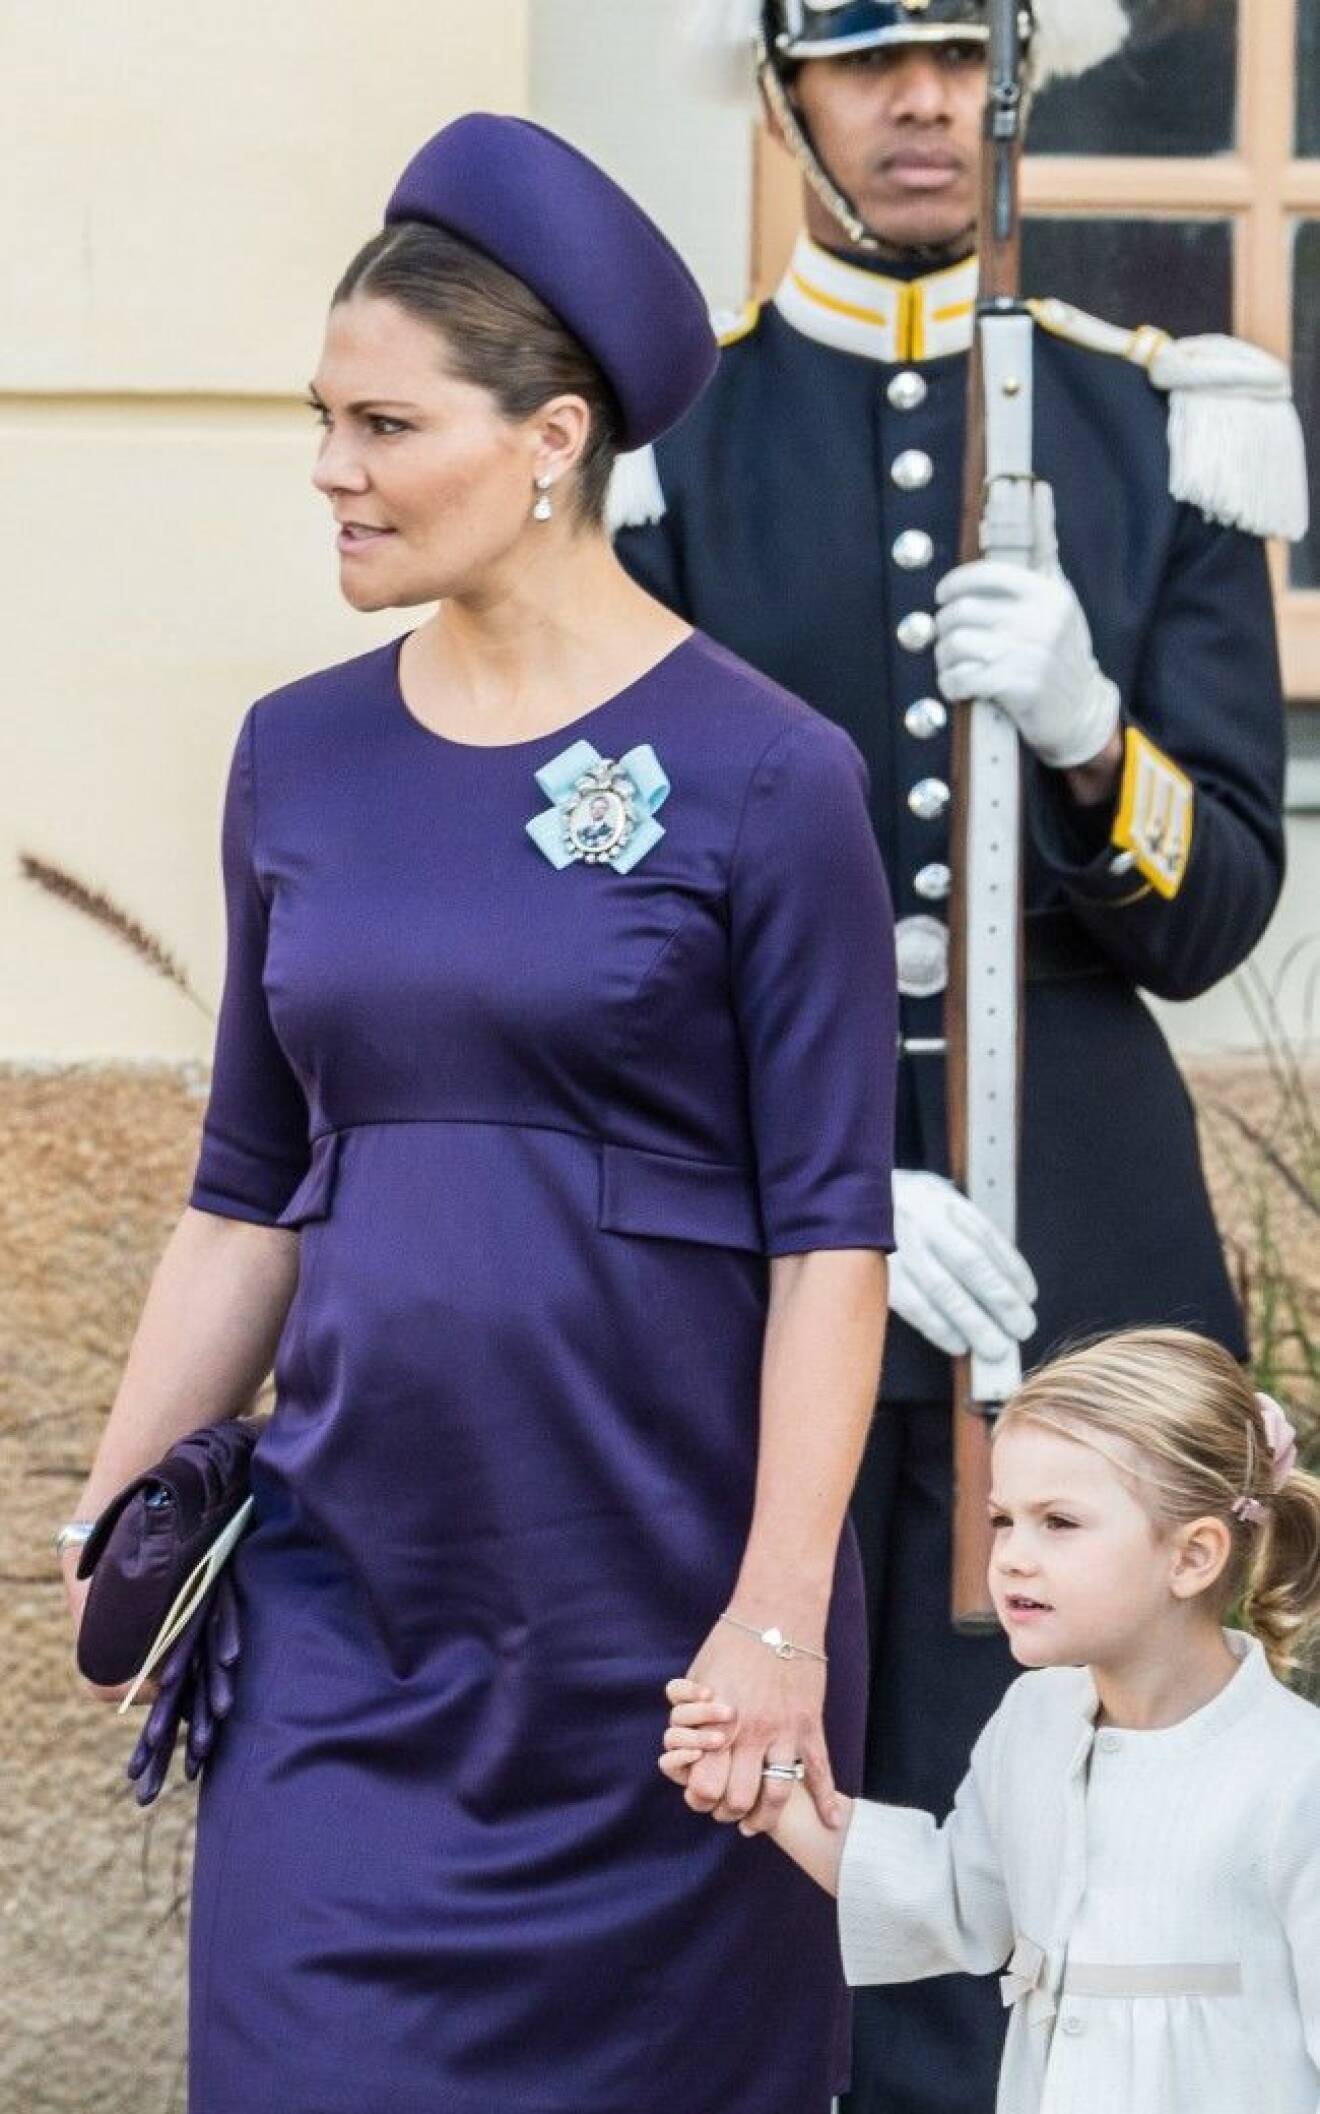 2015-10-11, Drottningholm Palace Church, Sweden In pic: Crown Princess Victoria, Prince Daniel, Princess Estelle Today was the baptism of Princess Madeleine and Christopher O'Neill's son - Prince Nicolas at the Drottningholm Palace Church. From the swedish royal family was also King Carl Gustaf, Queen Silvia, Crown Princess Victoria, Prince Daniel, Estelle, Prince Carl Philip and Princess Sofia attended. After the naming ceremony that began at 12:00 gave the royal couple a reception inside the Drottningholm Palace. Pictures of this event. All Over Press